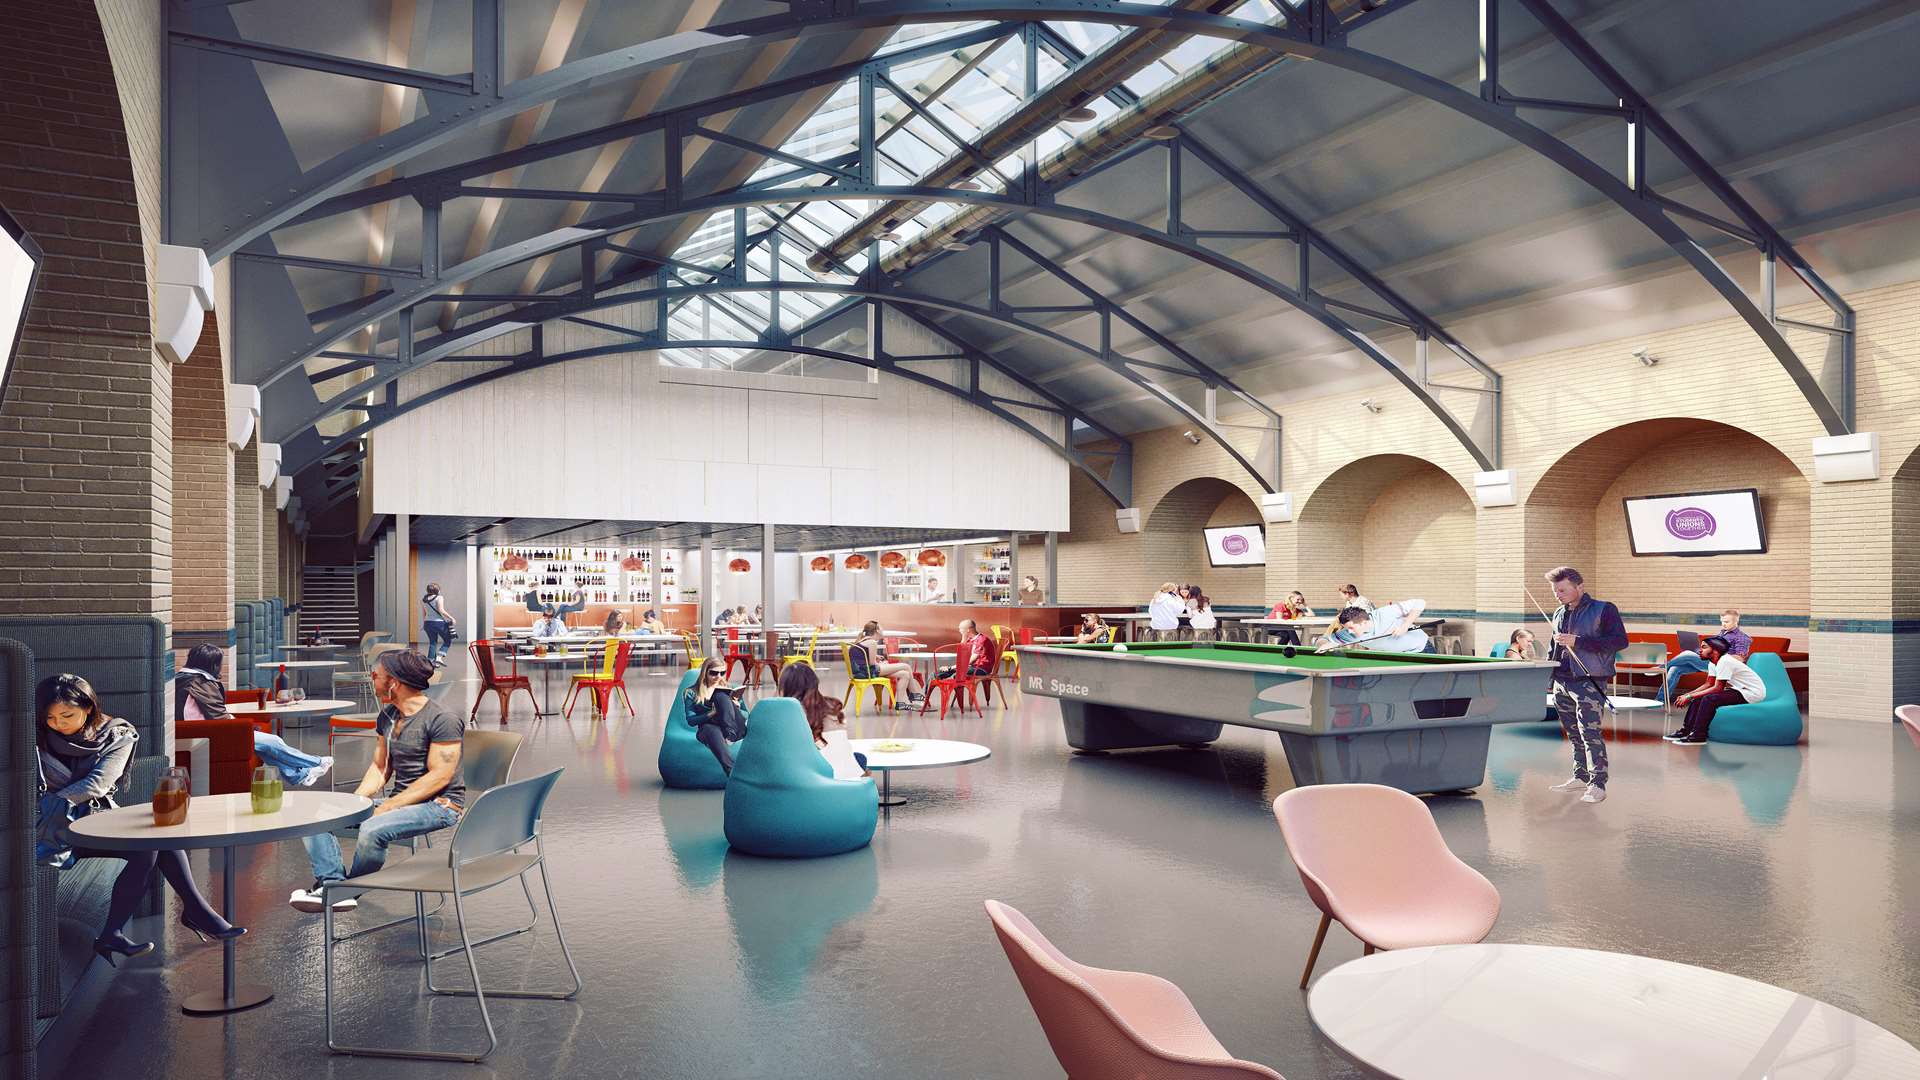 An artist's impression of the student hub at the Medway university campus